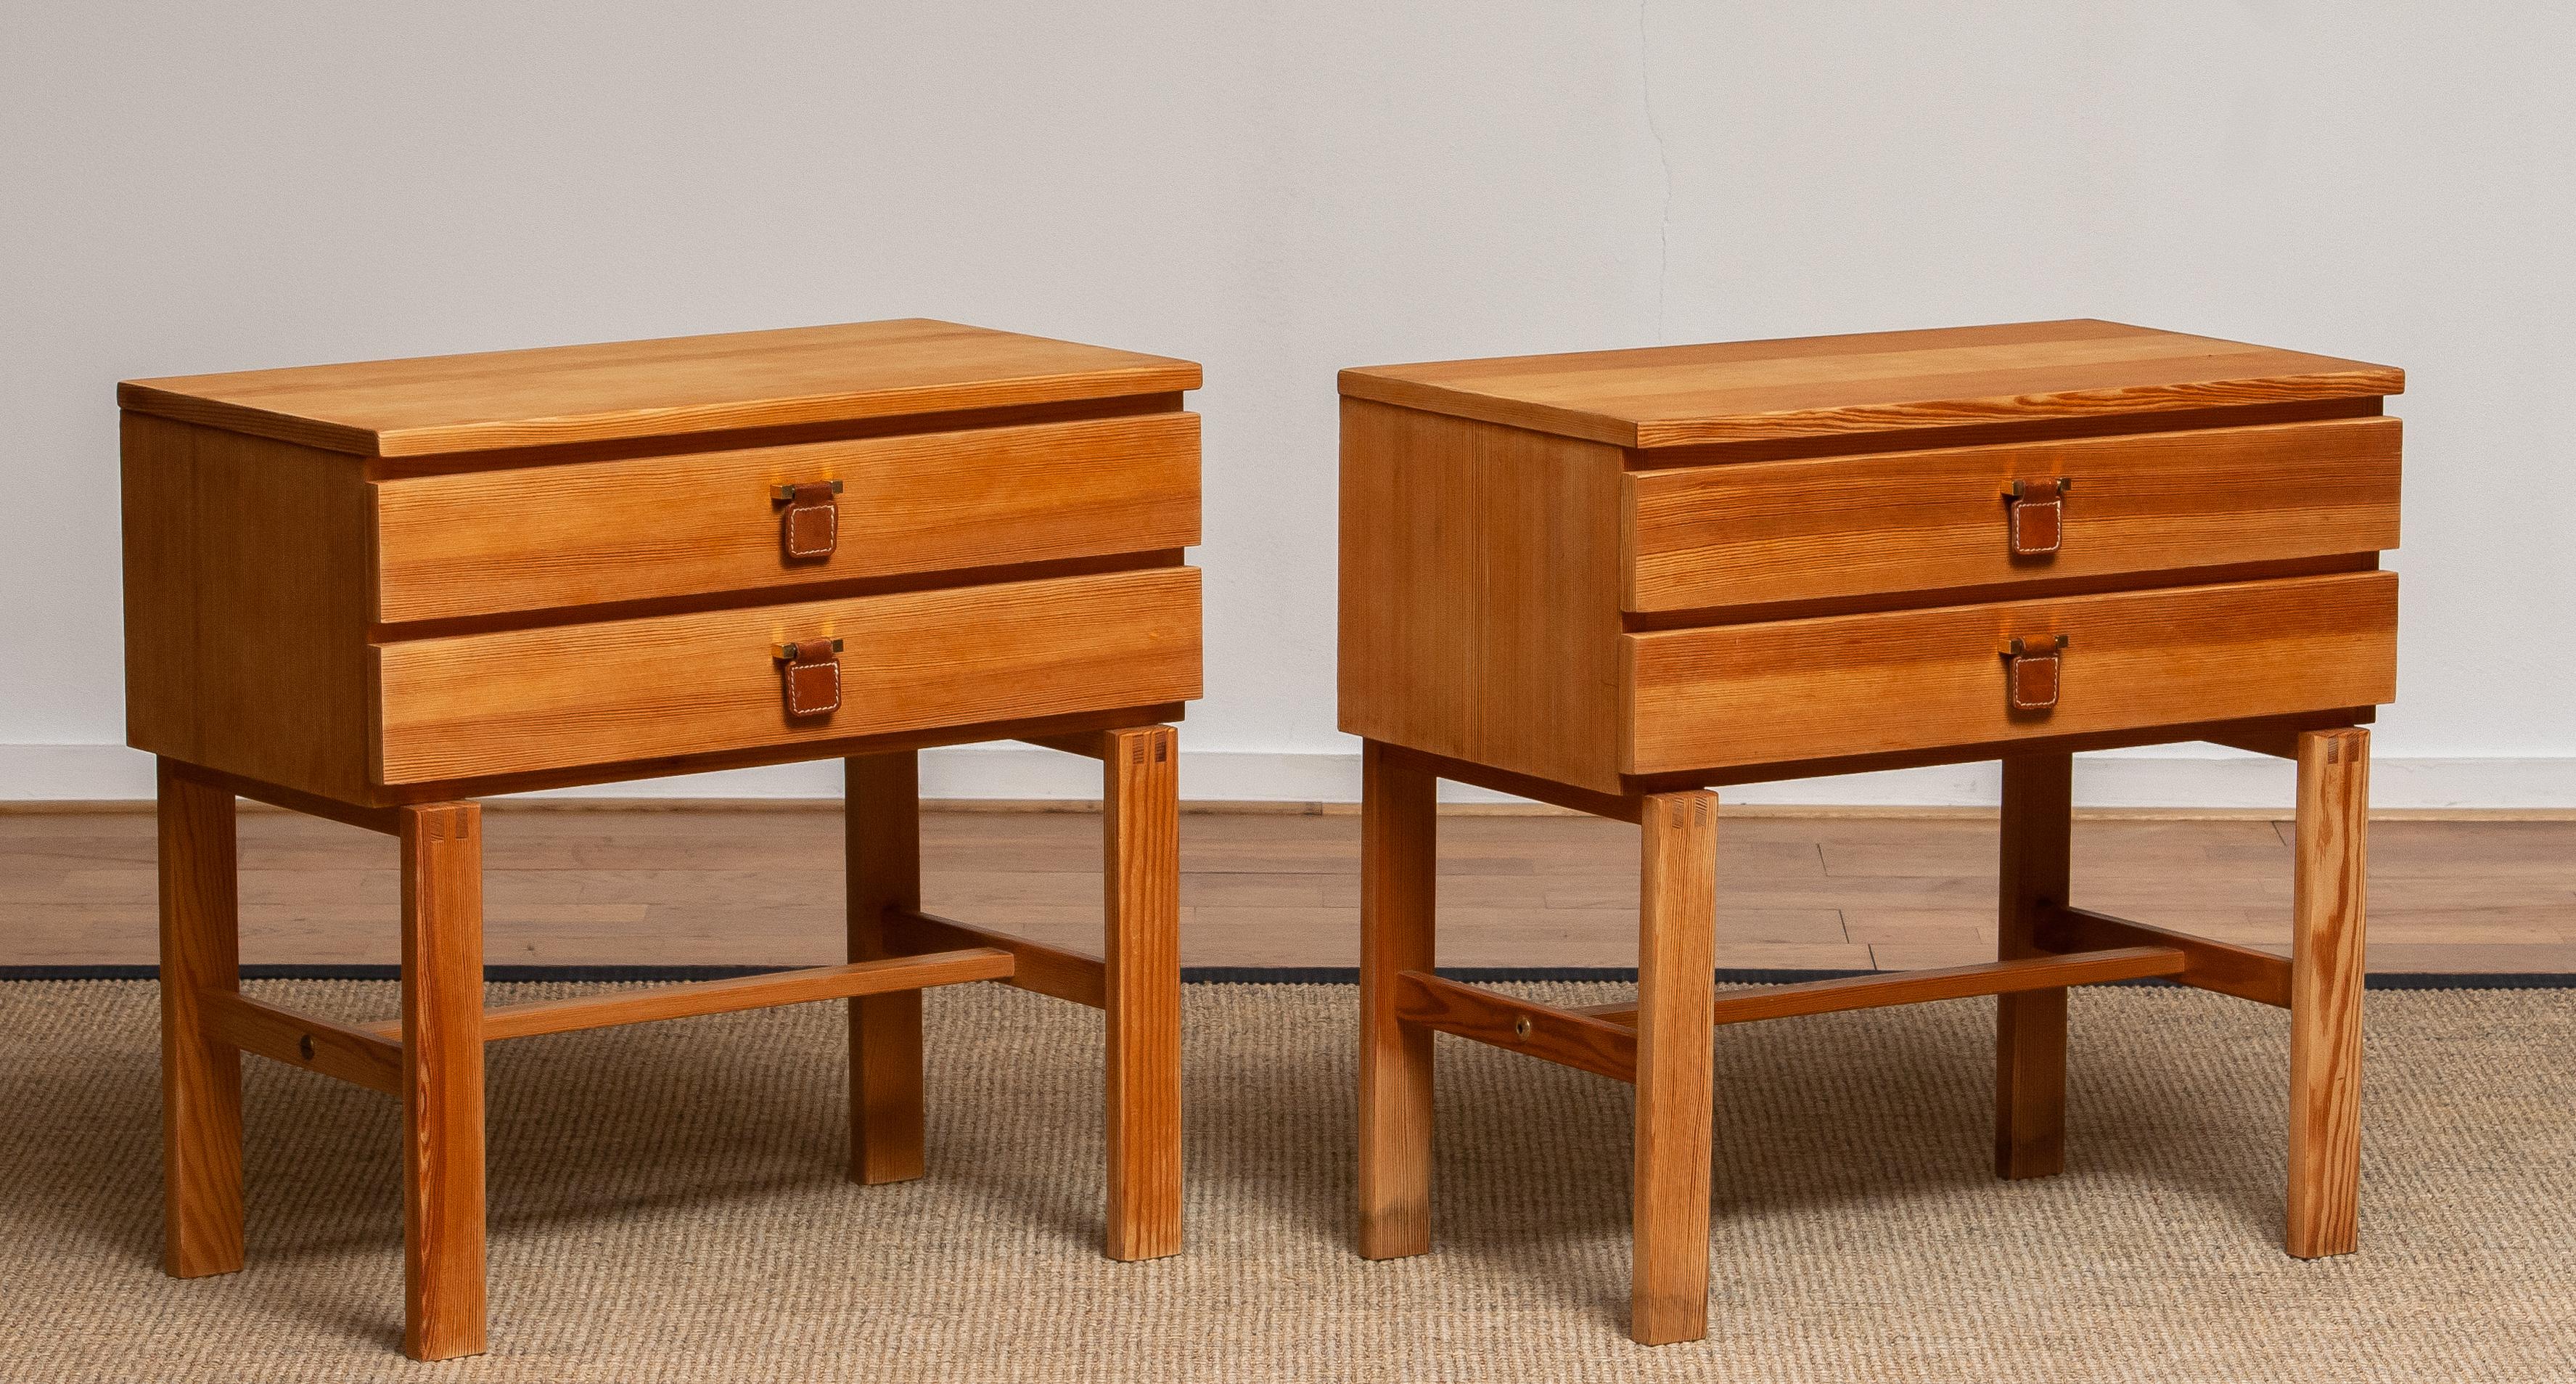 Brass 1970s, Pair of Nightstands or Bedside Tables in Pine by Sigurd Göransson, Sweden